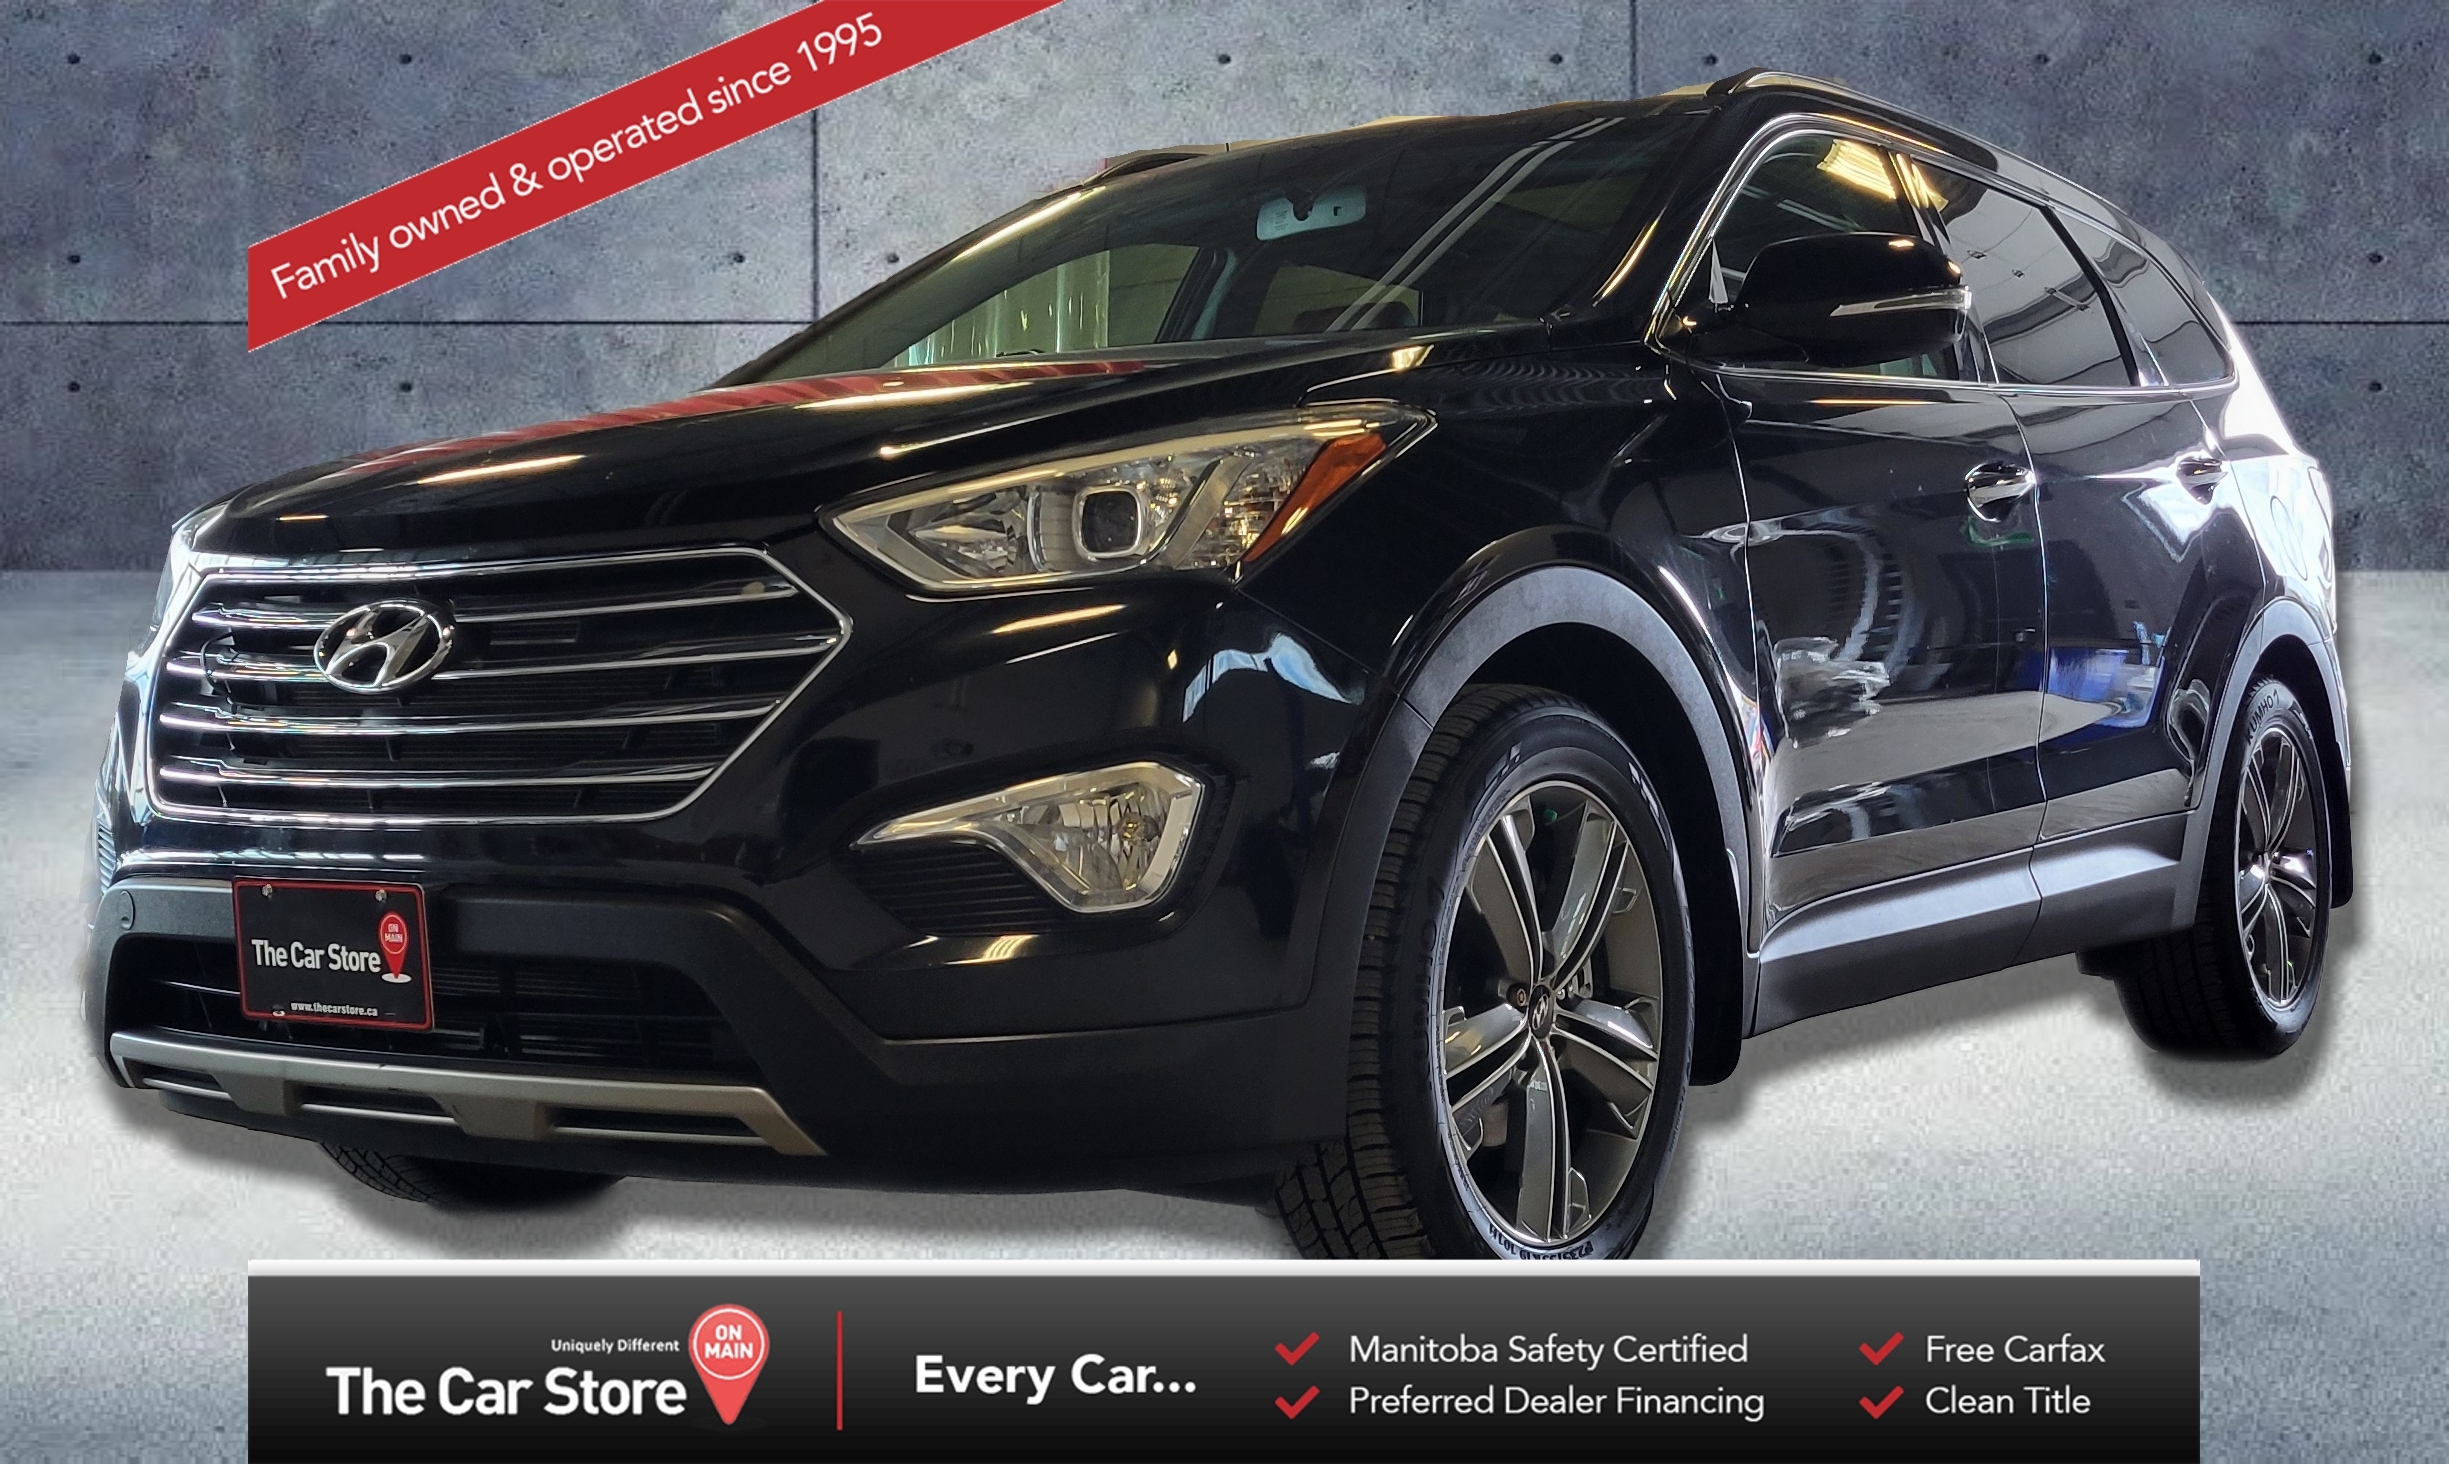 2016 Hyundai Santa Fe XL AWD Limited| 3 Rows/Leather/Pano Roof/Clean Title!